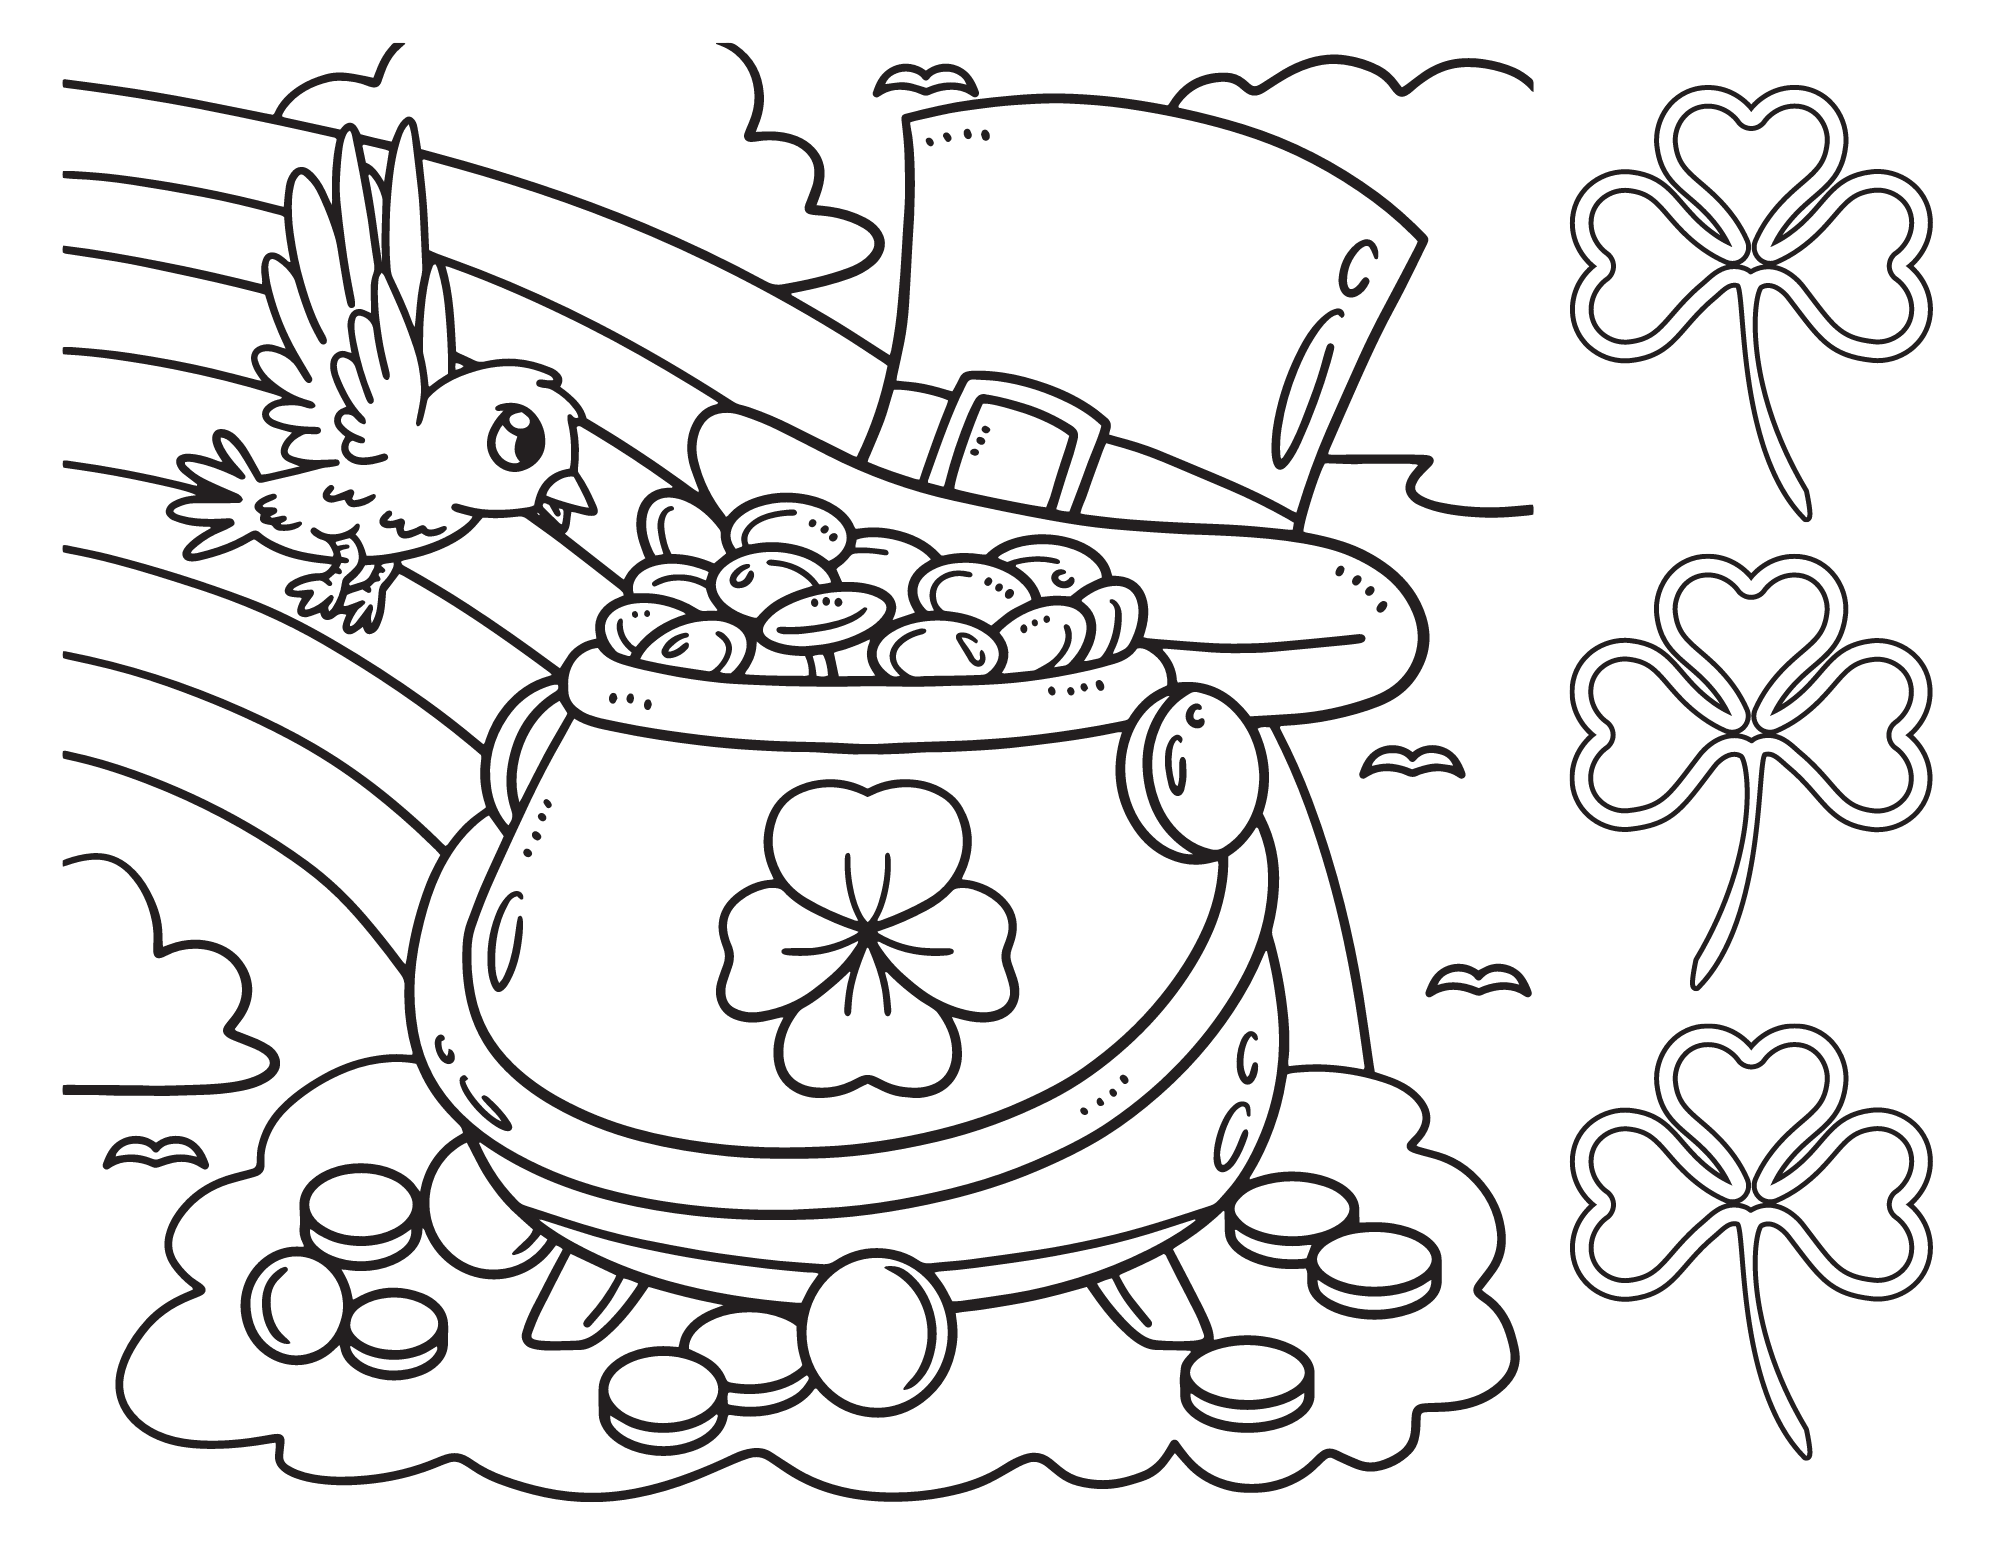 St. Patrick's Day pot of gold coloring page